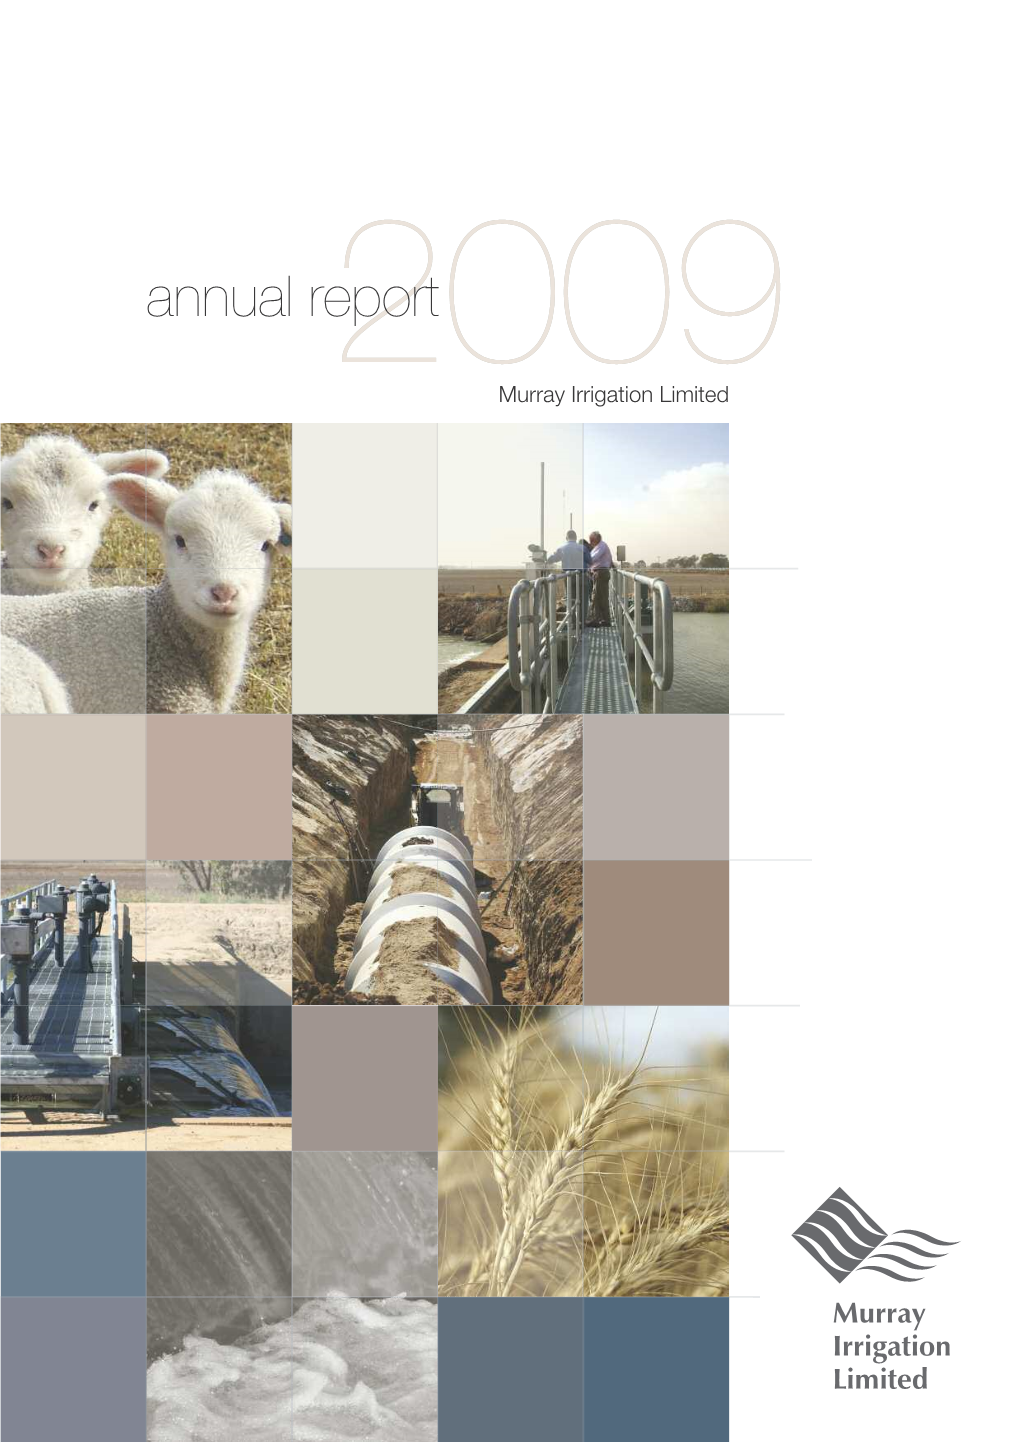 Annual Report Is a Summary of Operations and Performance of the Company from 1 August 2008 to 30 June 2009